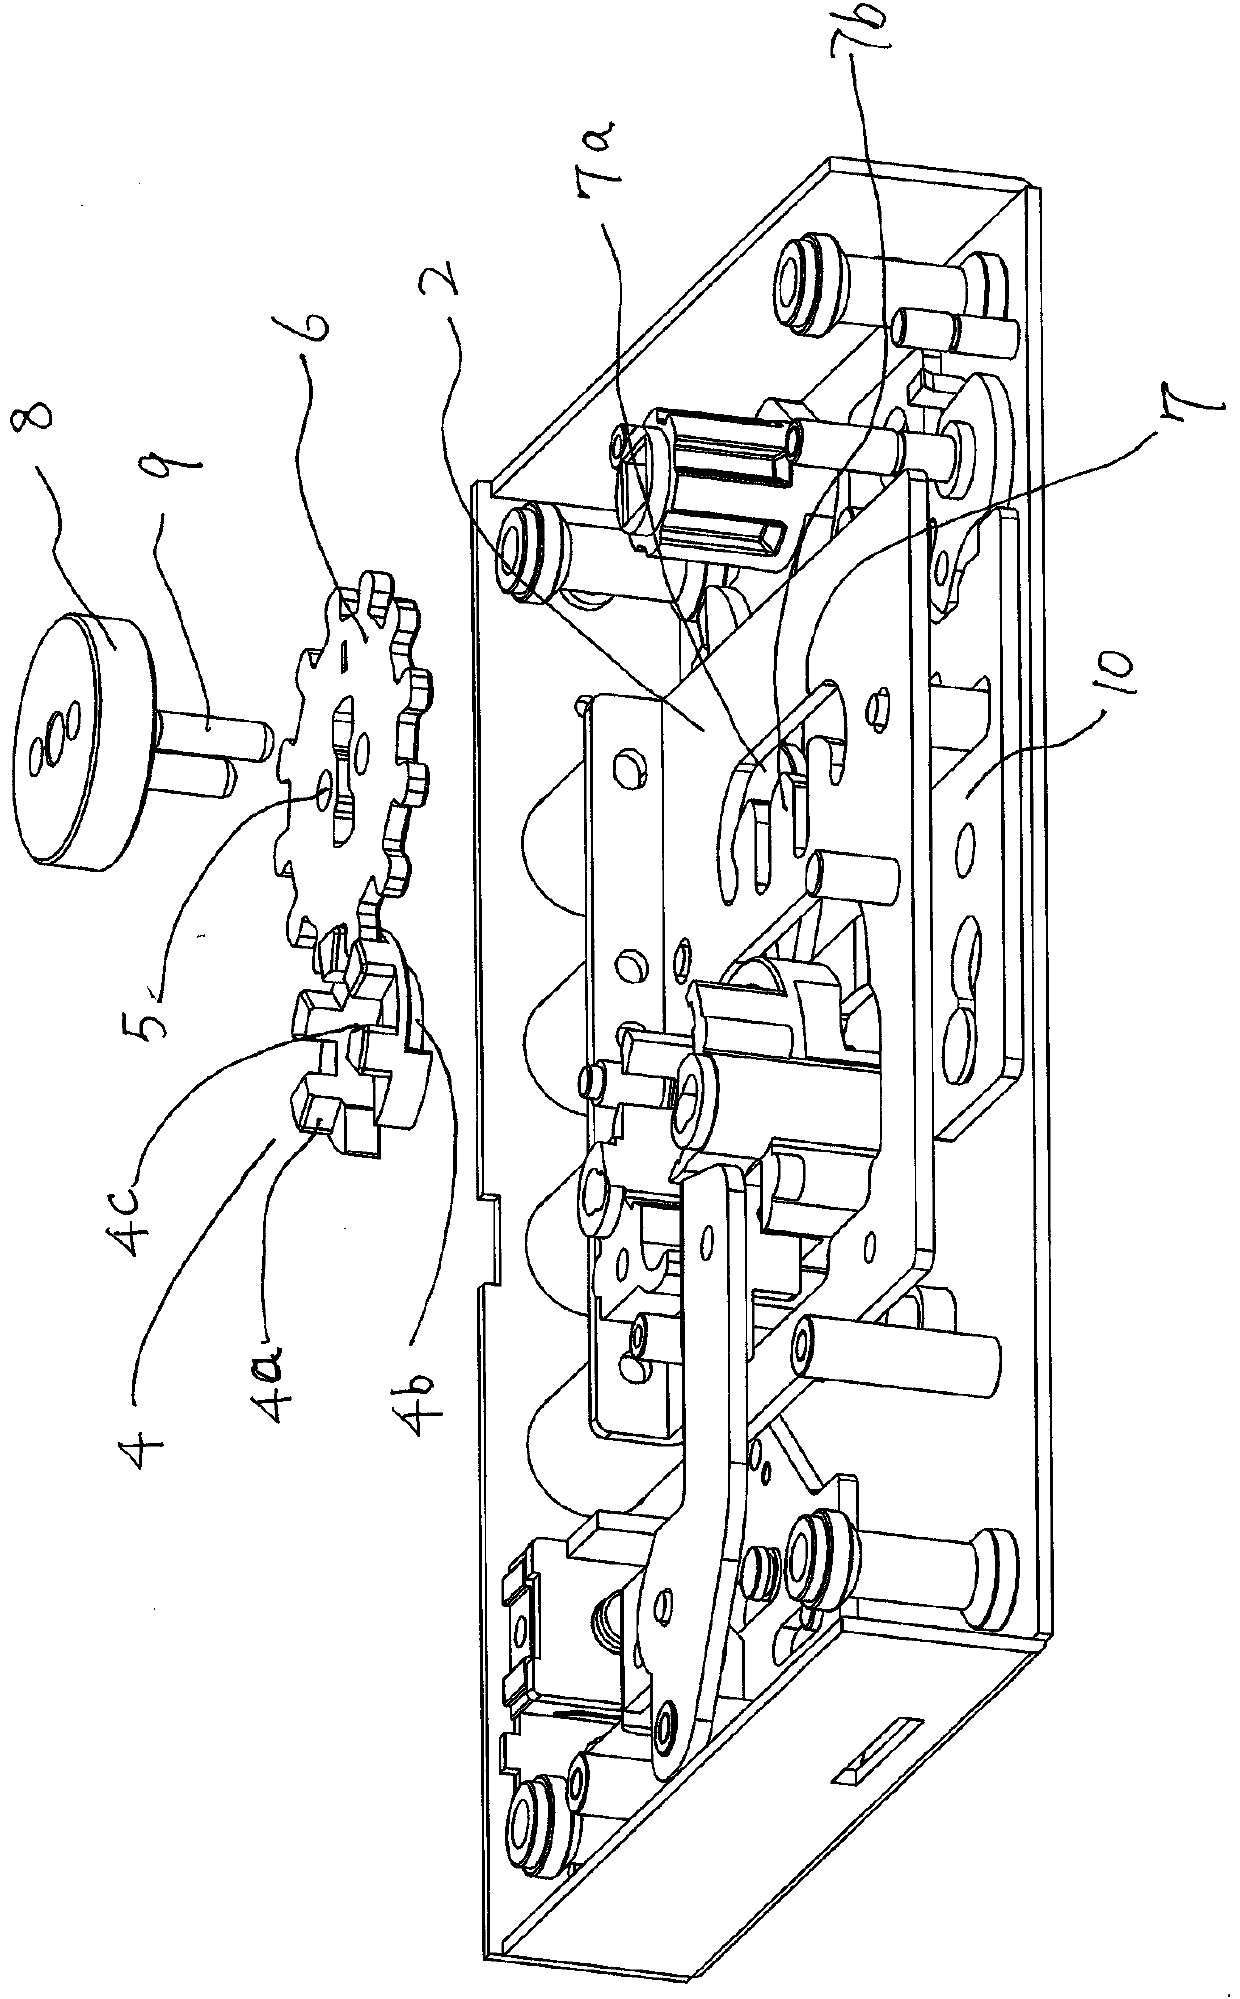 Gear lock mechanism with anti-theft device